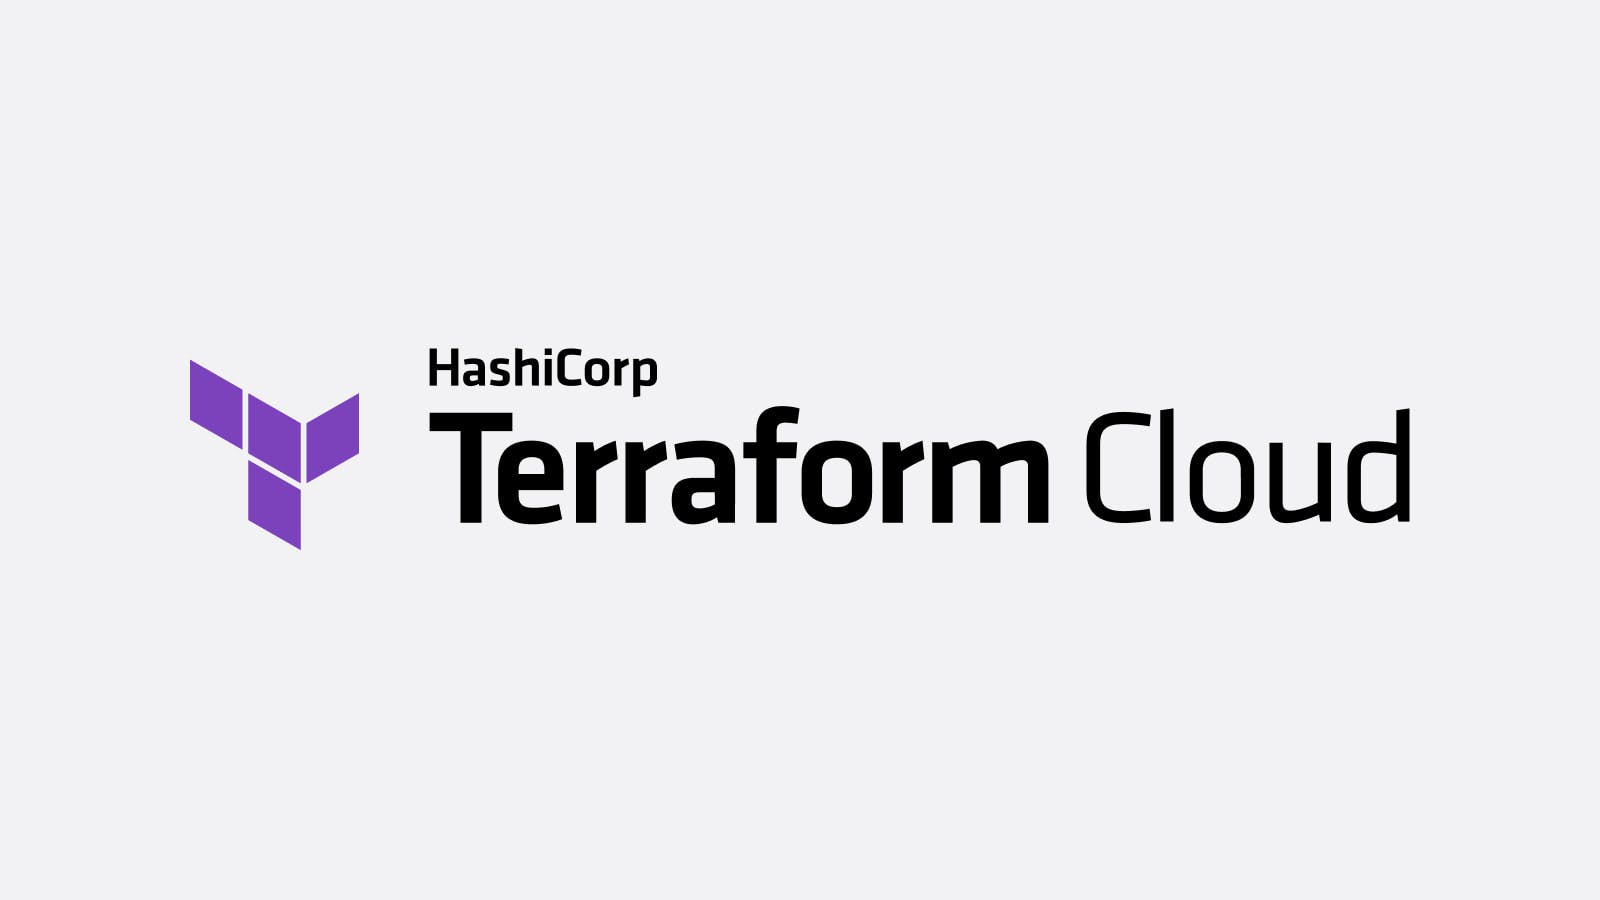 Change Management At Scale: How Terraform Helps End Out-of-Band Anti-Patterns